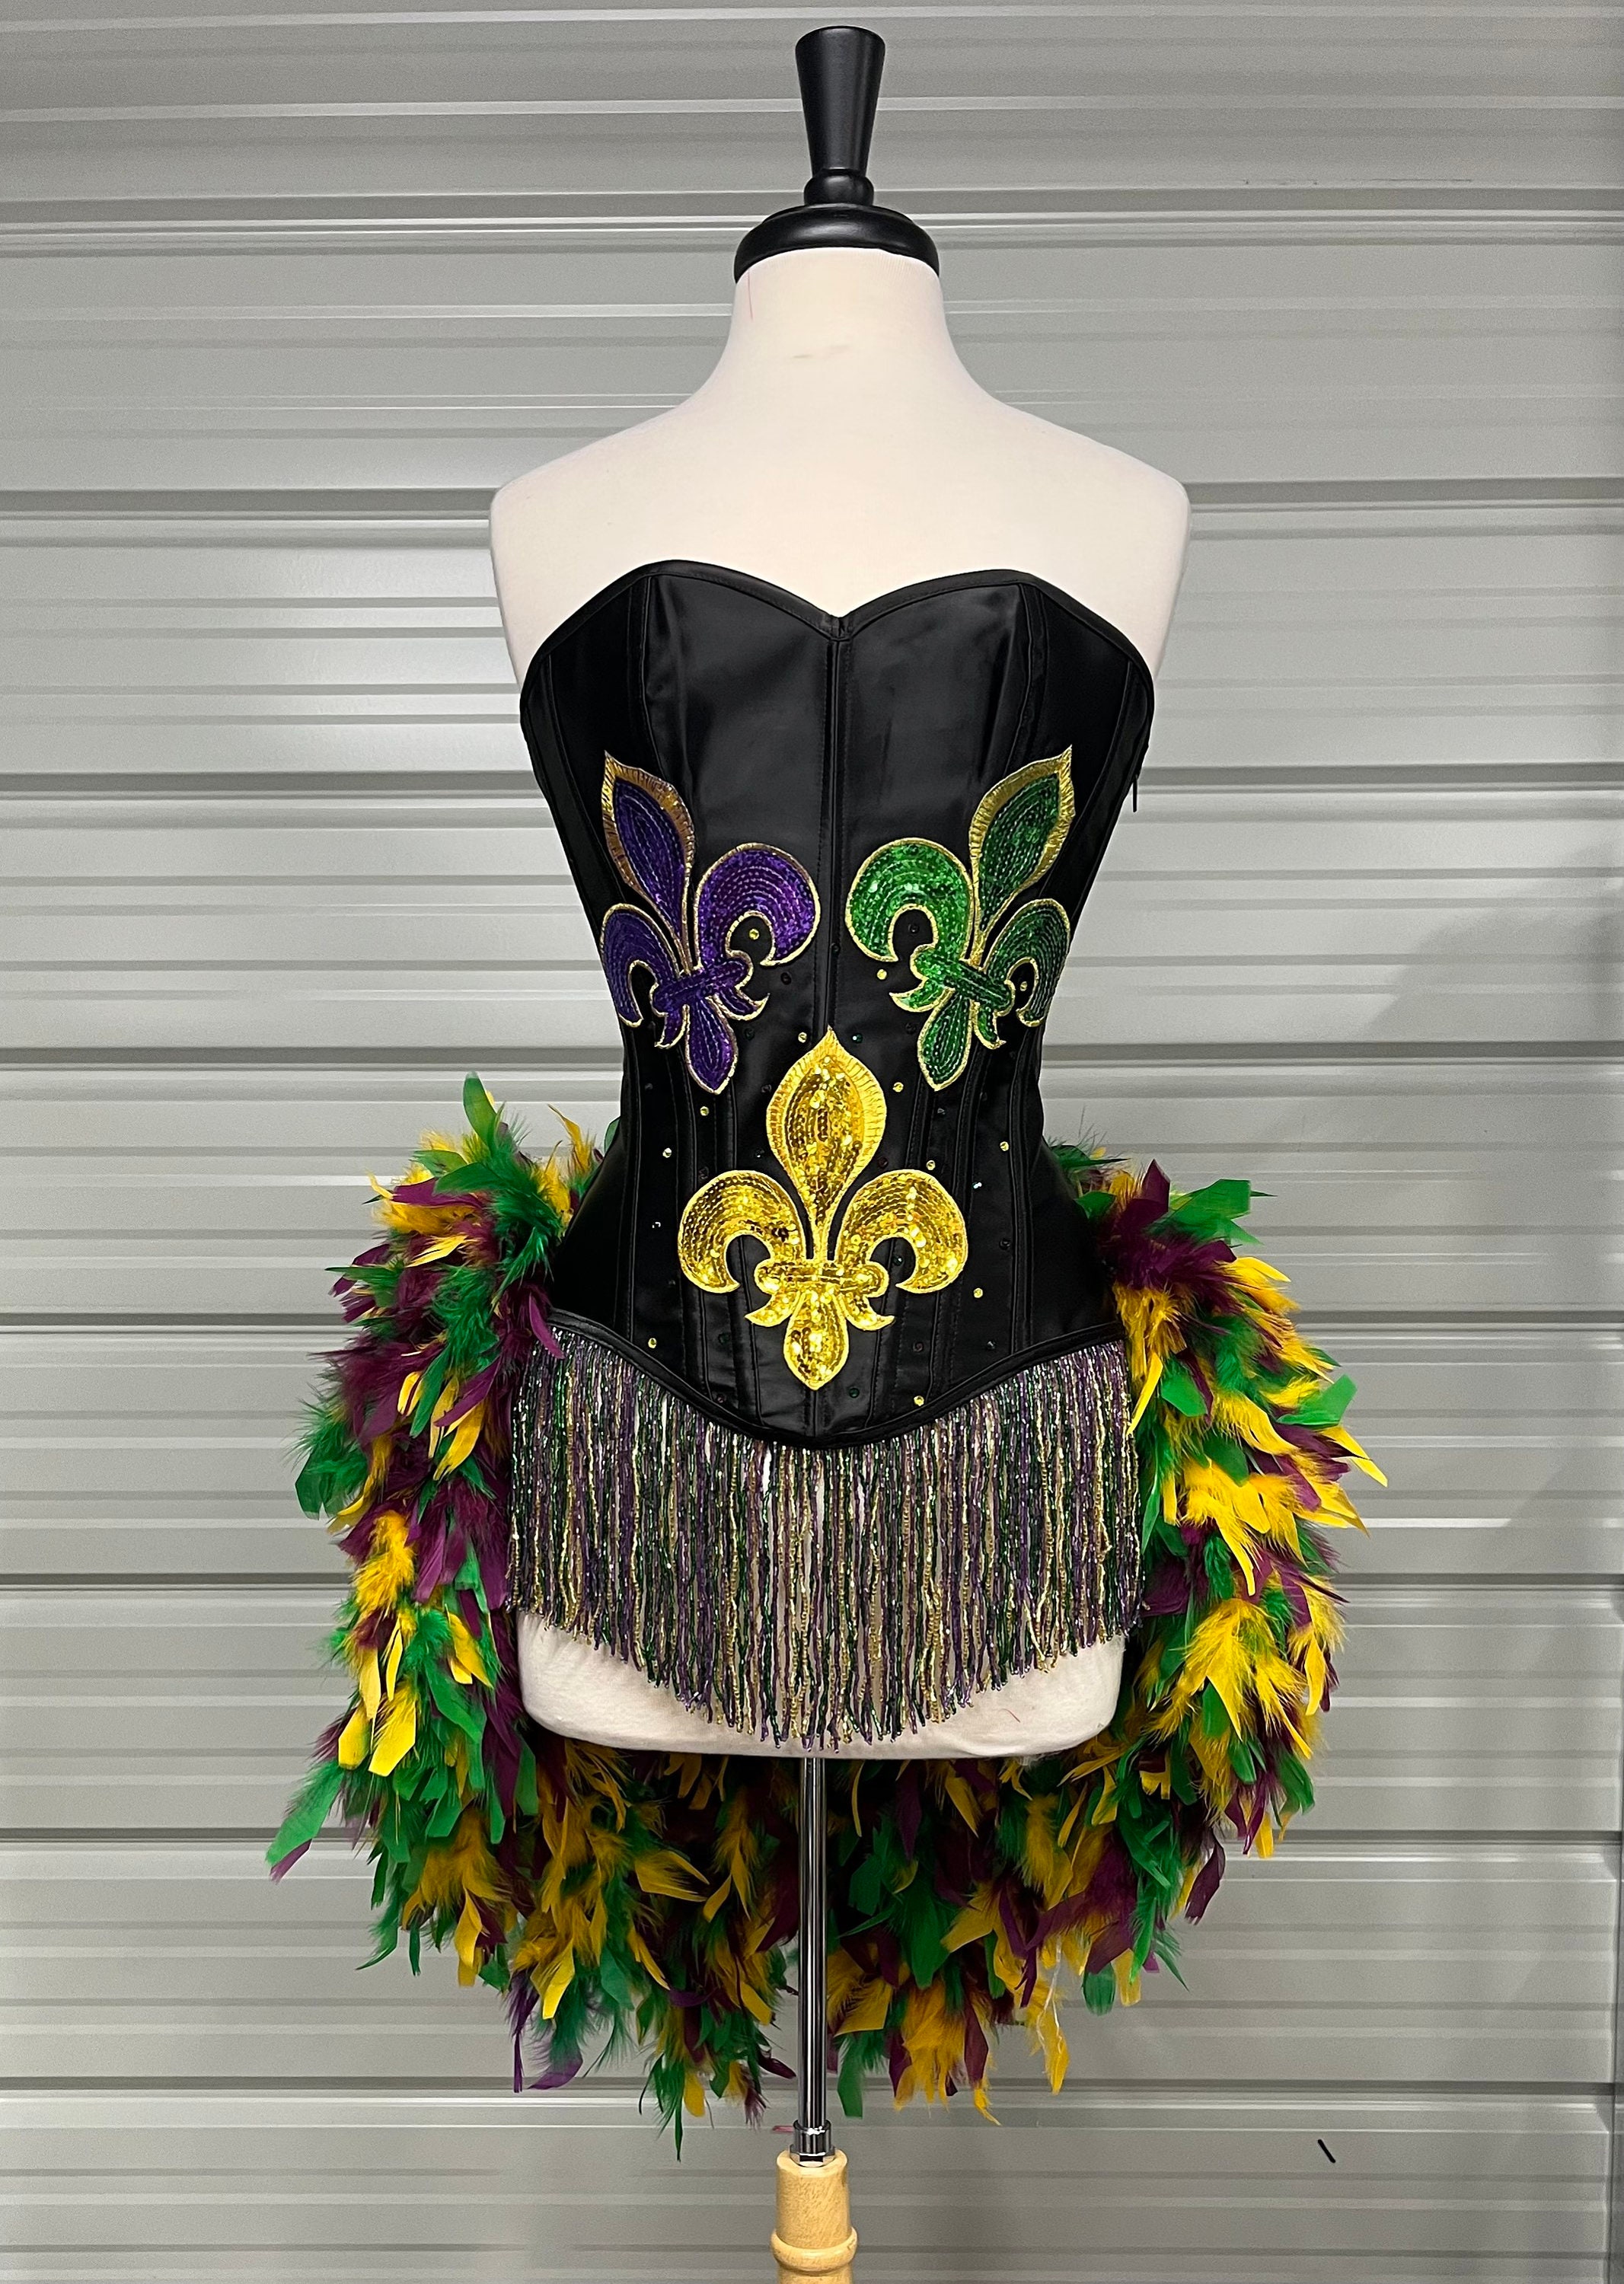 Ultimate Sequin, Crystal, and Glass Fringe Beaded Mardi Gras